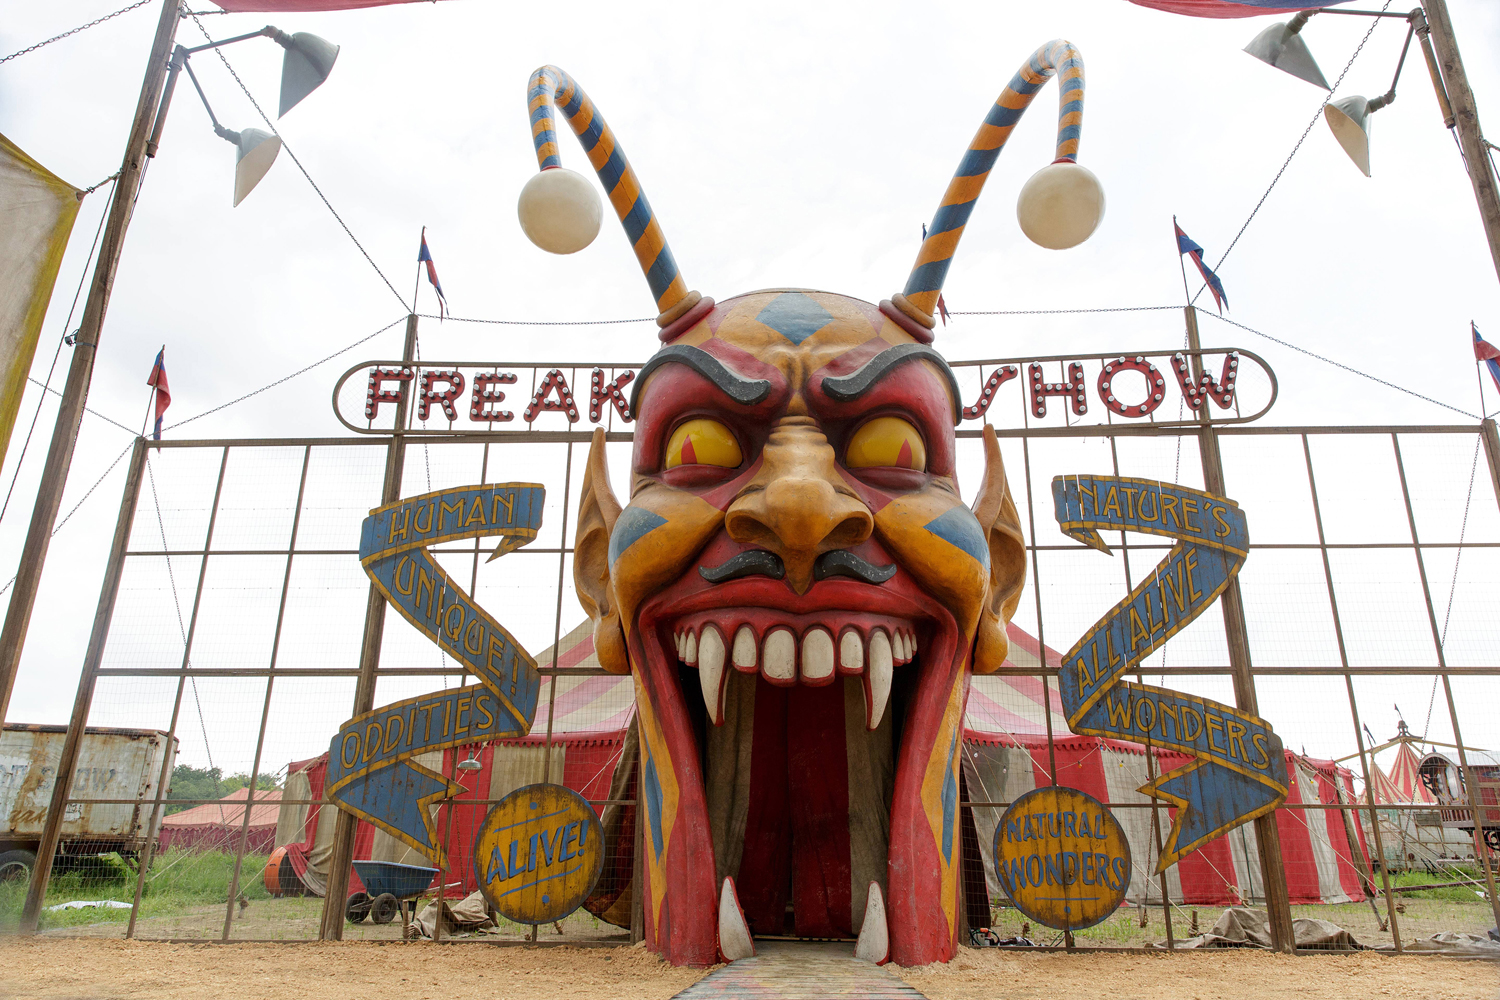 'American Horror Story: Freak Show' premieres on October 8 at 10 PM ET on FX.